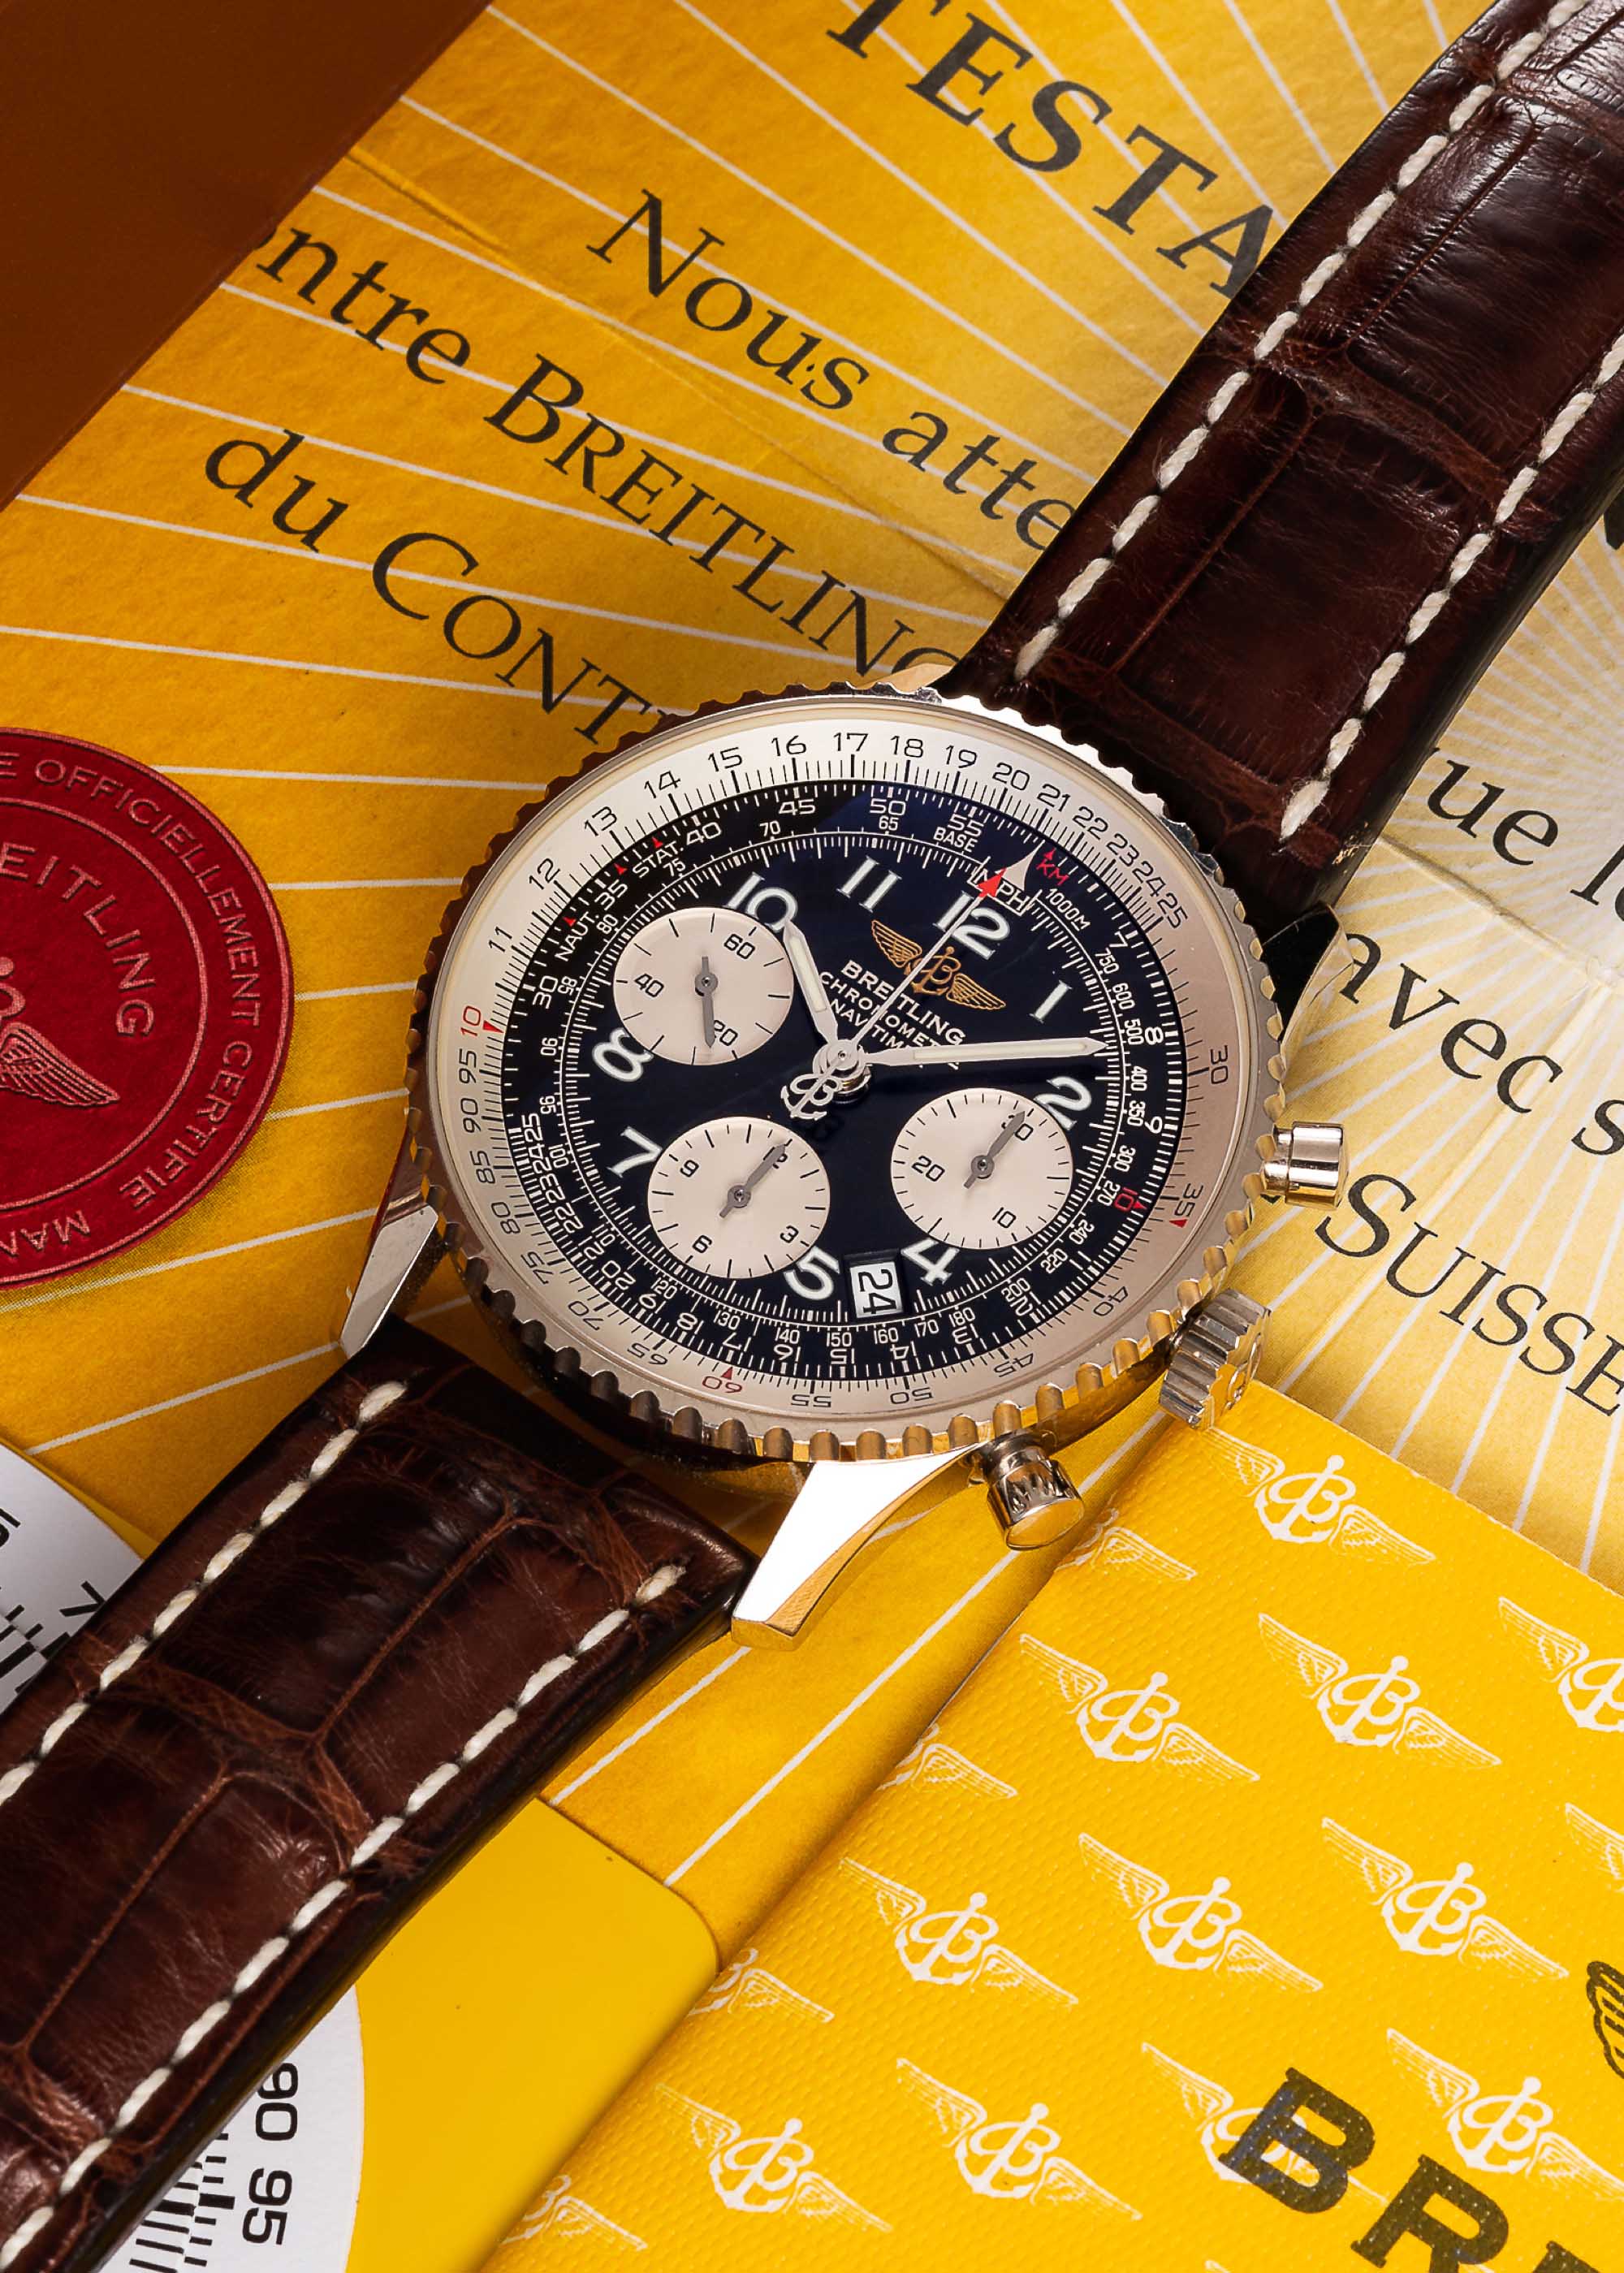 A GENTLEMAN'S 18K SOLID WHITE GOLD BREITLING CHRONOMETRE NAVITIMER CHRONOGRAPH WRIST WATCH DATED